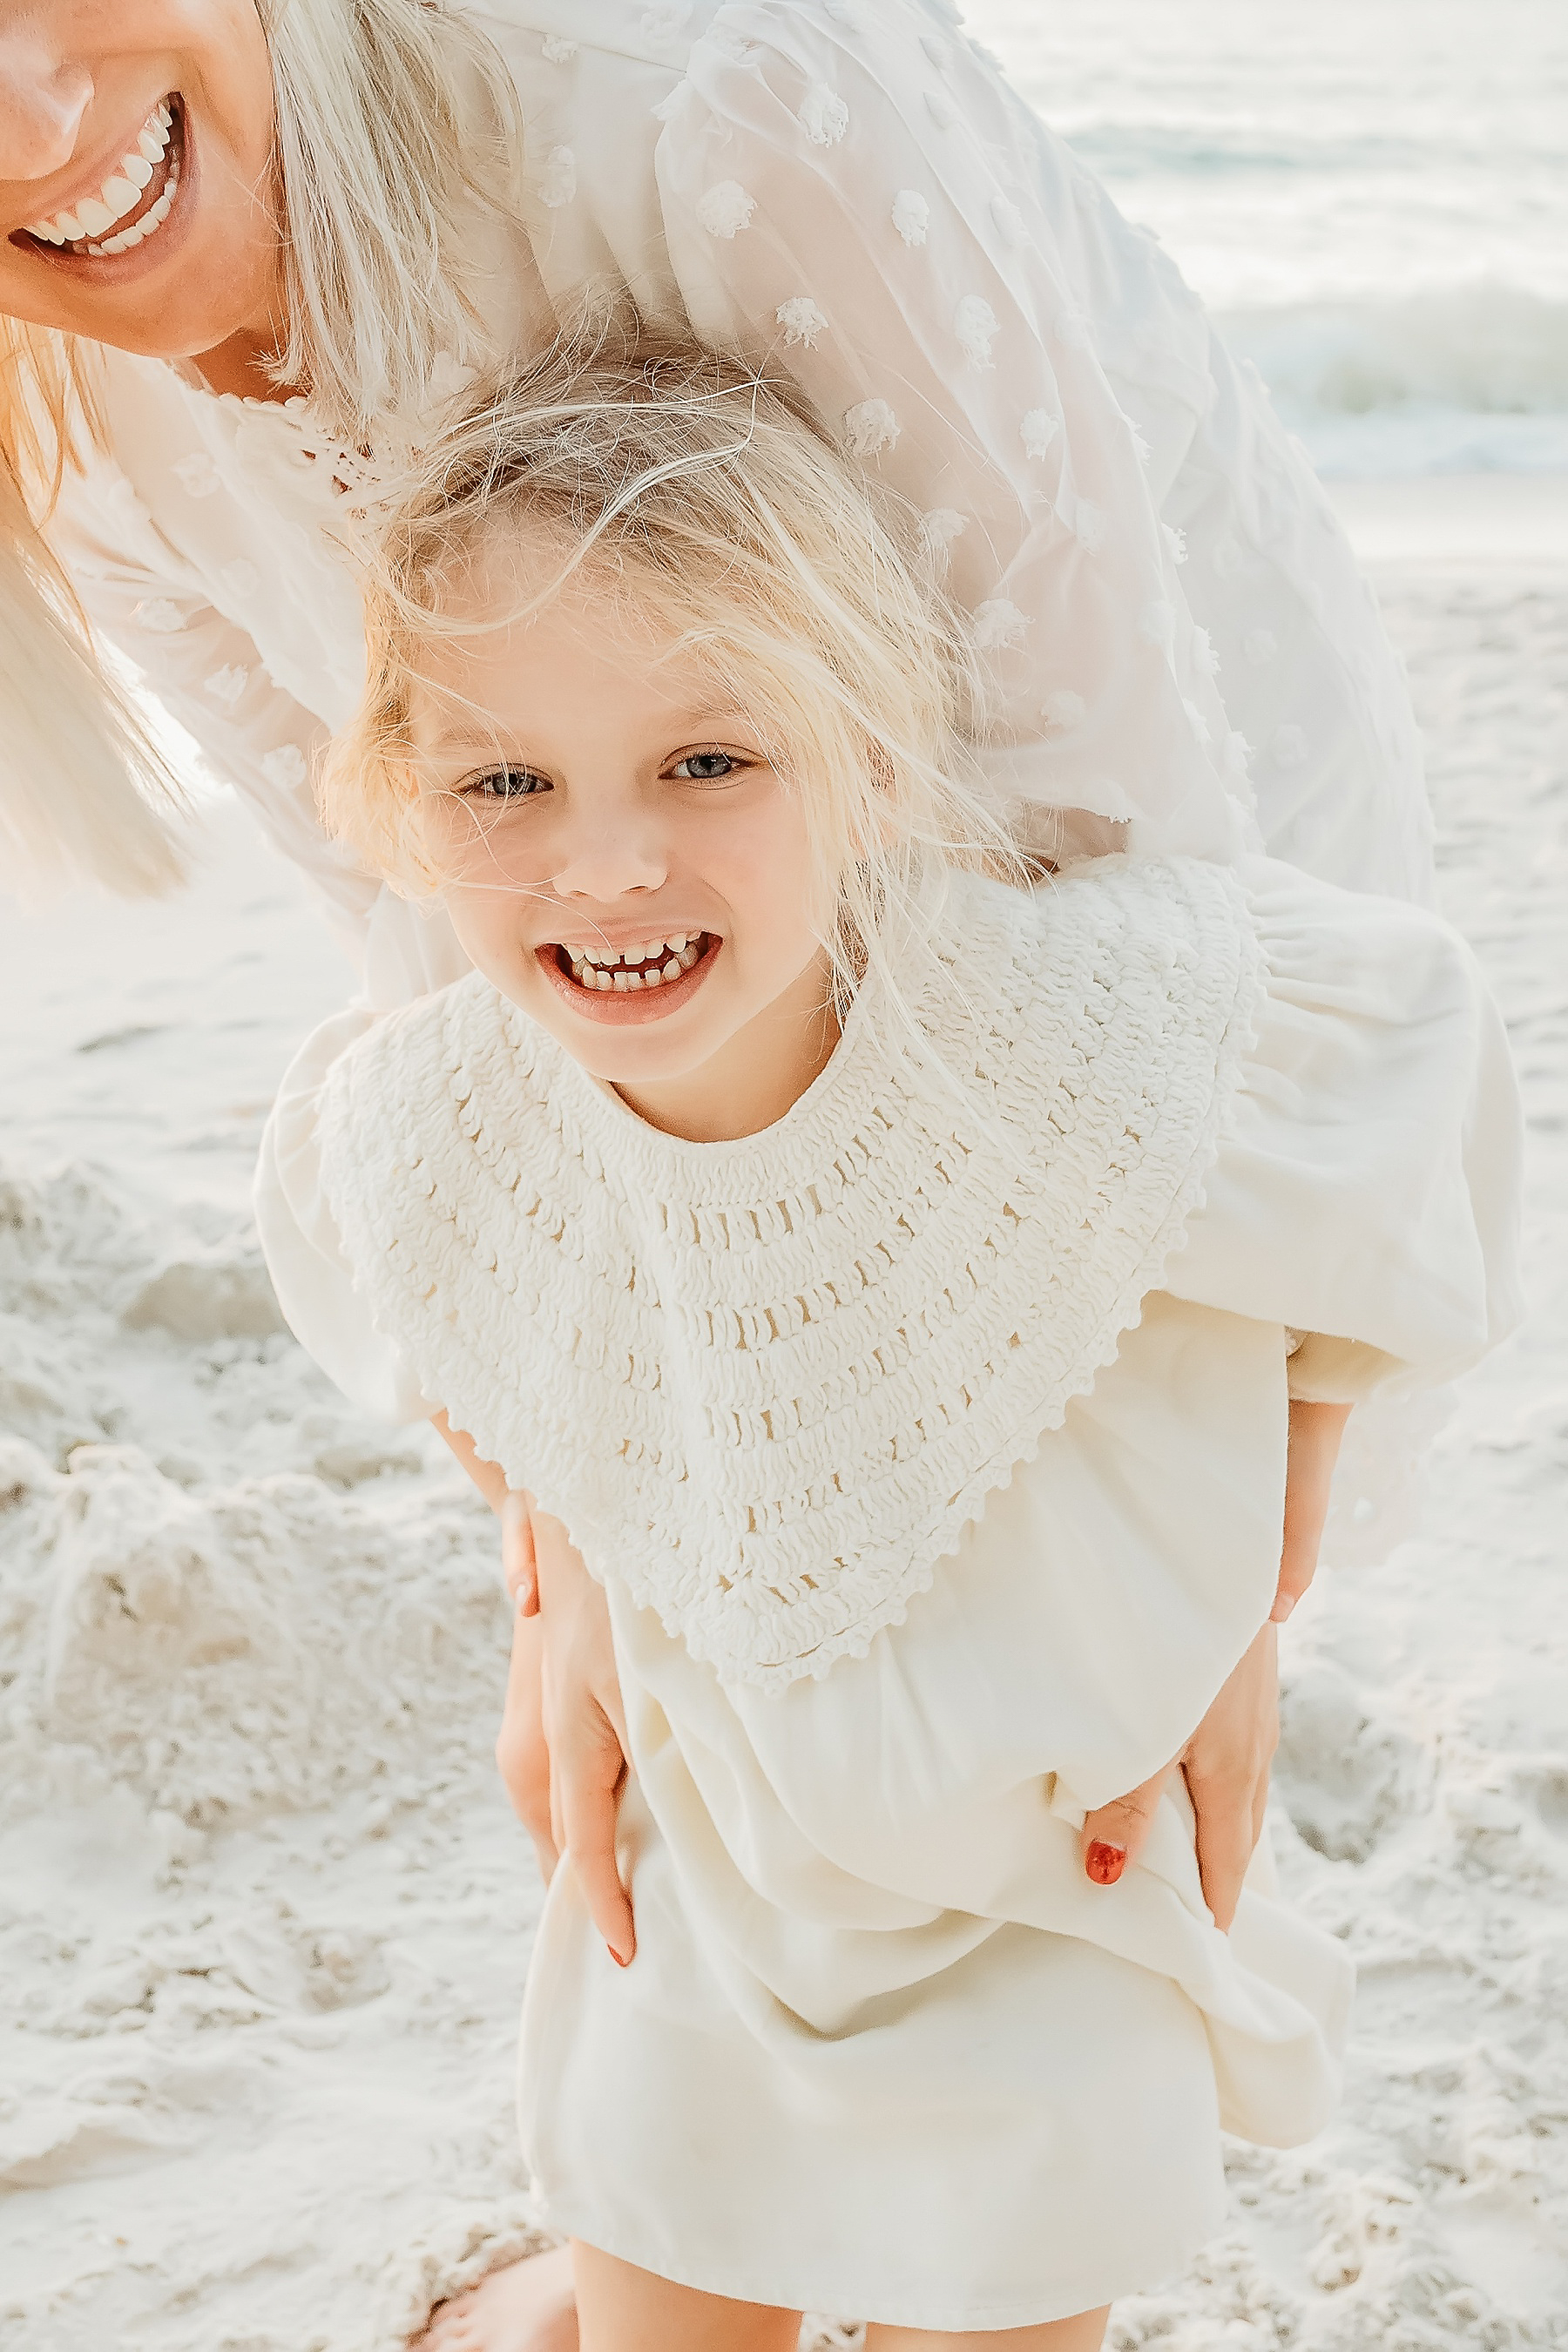 woman in white dress chasing little blonde girl in white dress smiling on the beach Naples Florida